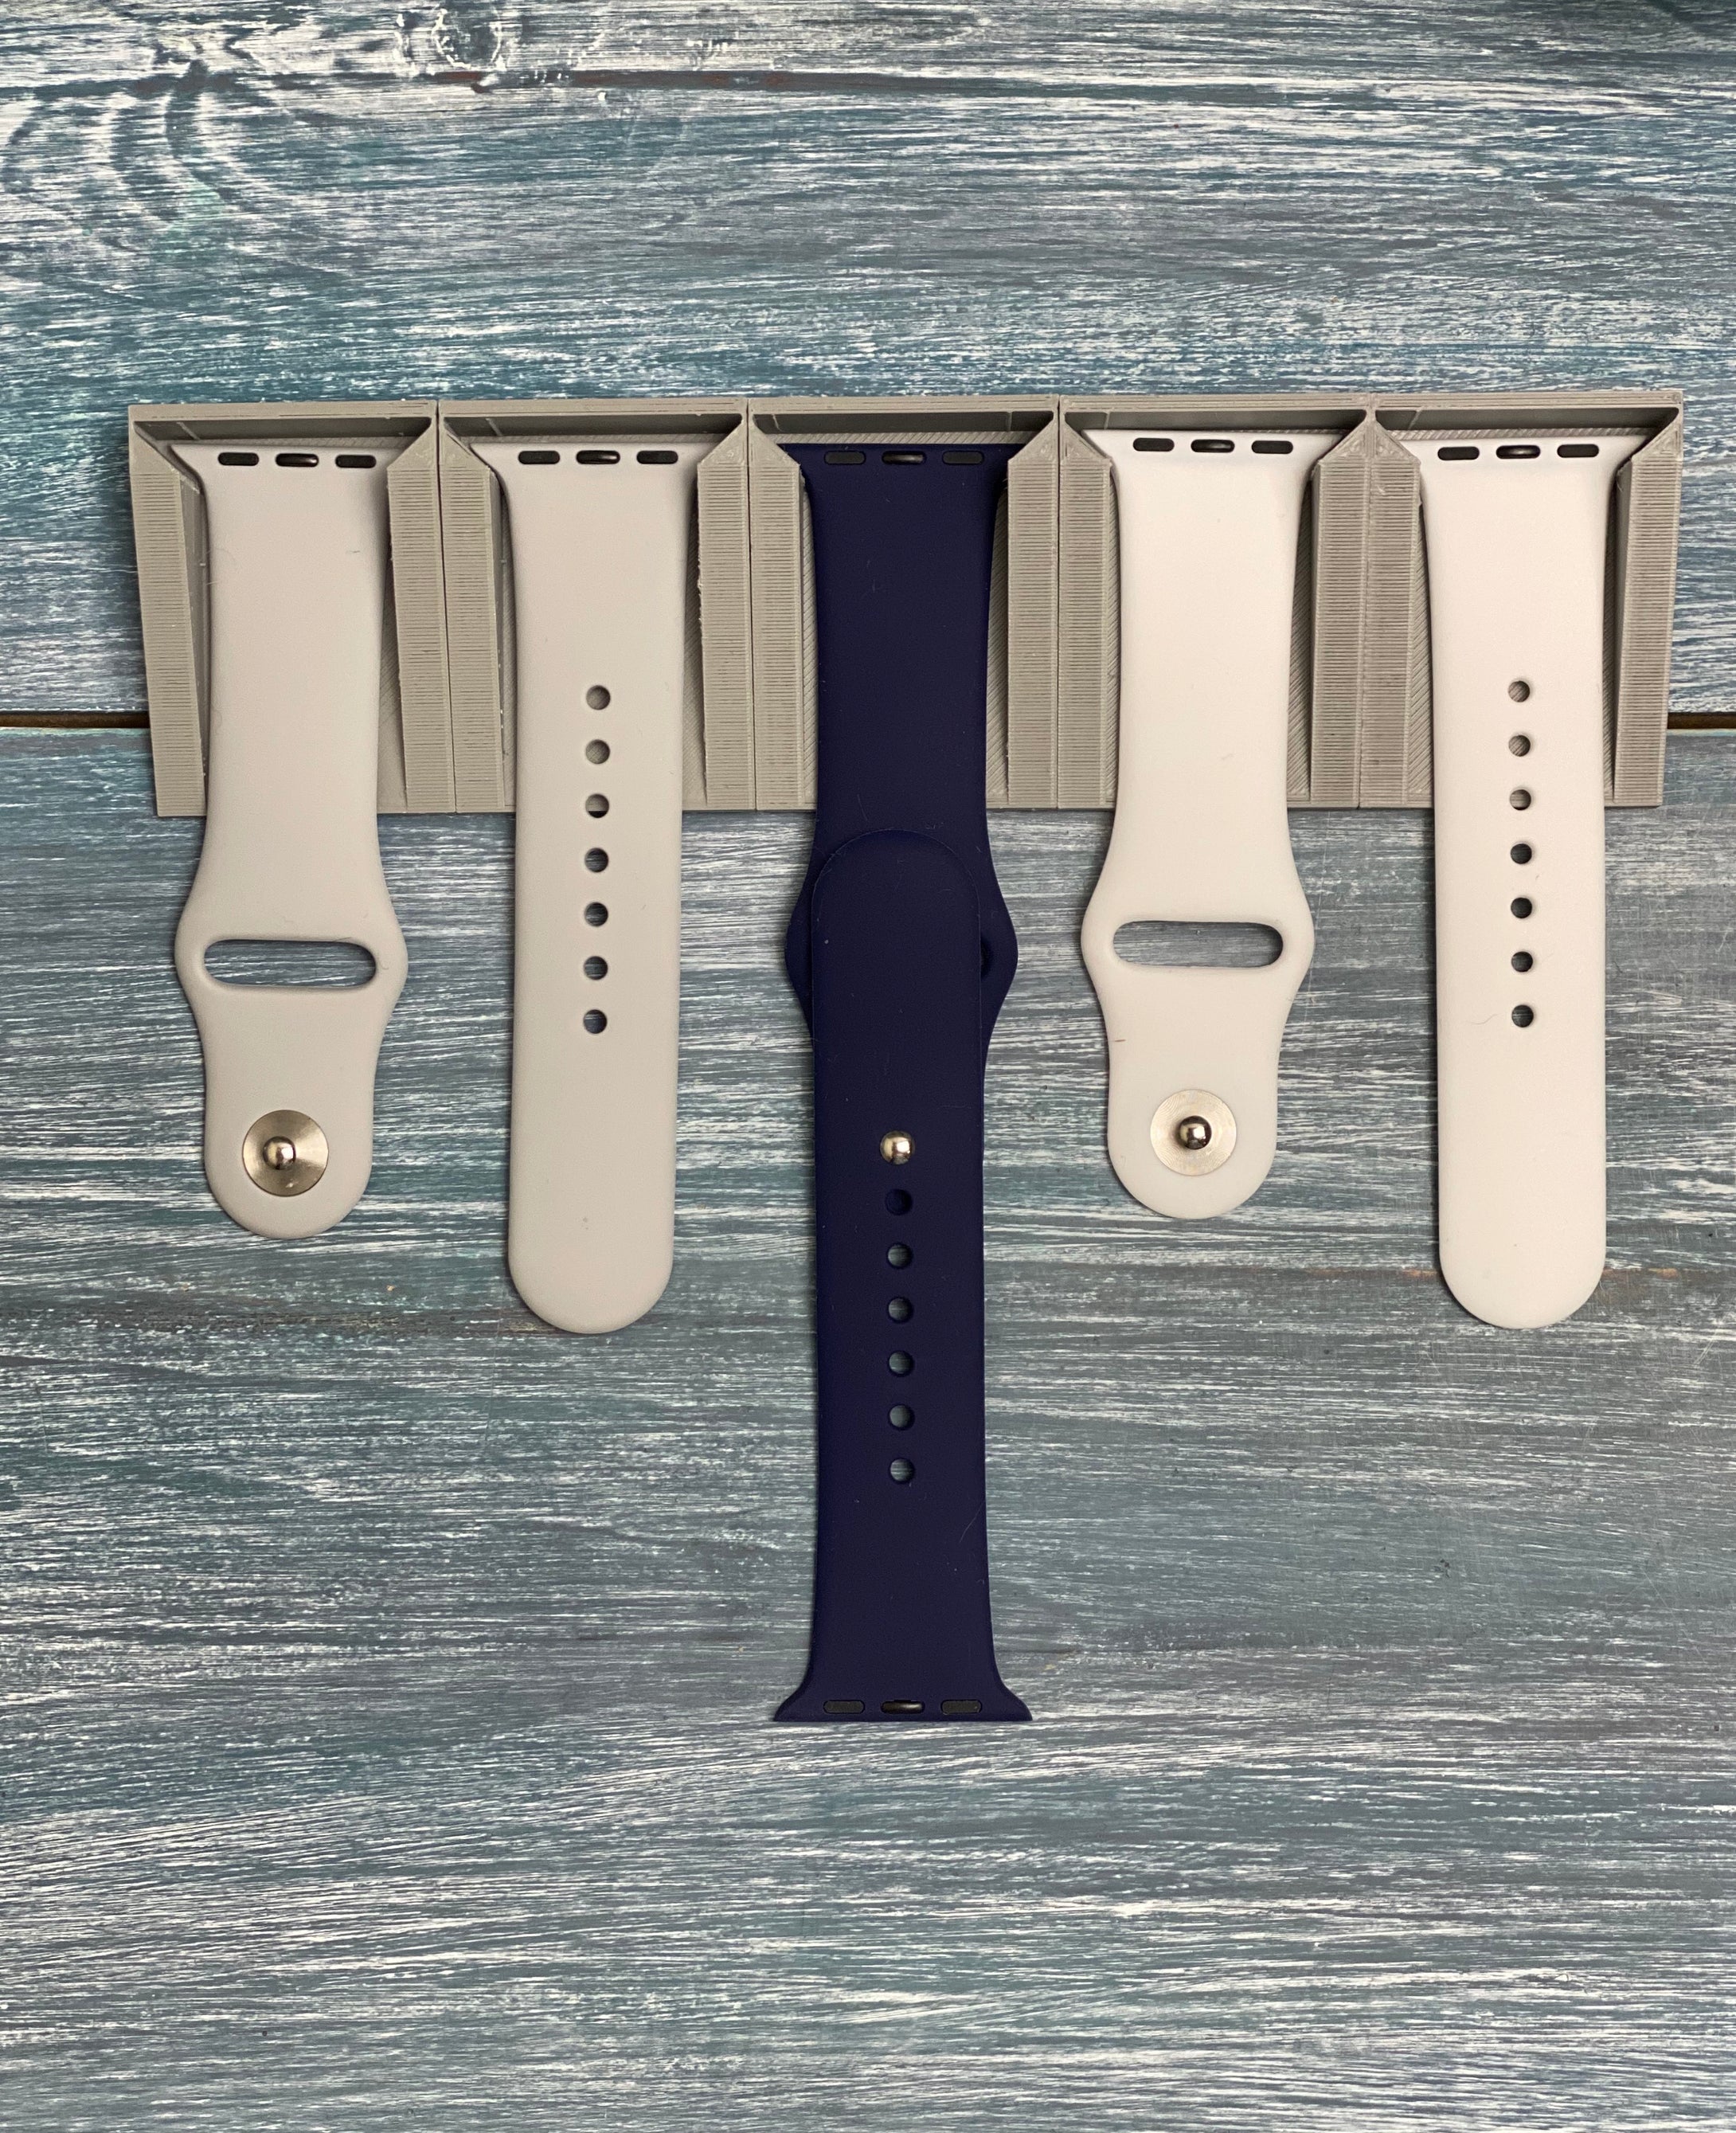 Watch Band Holders